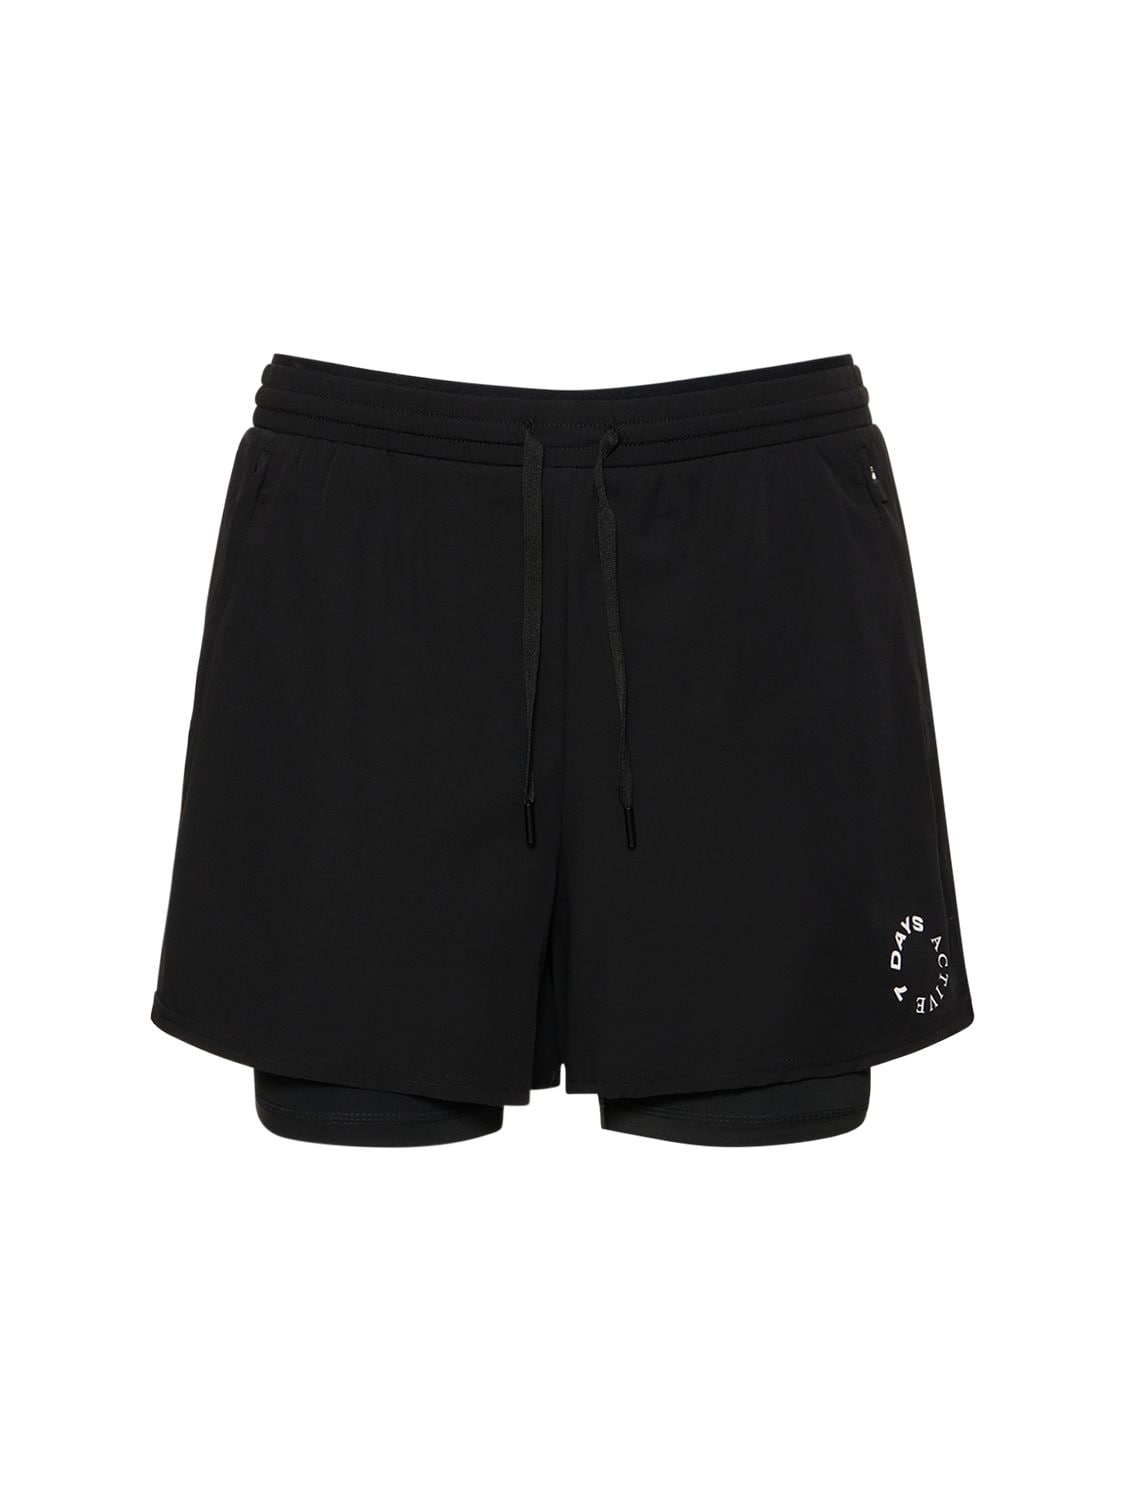 7 DAYS ACTIVE TWO-IN-ONE SHORTS